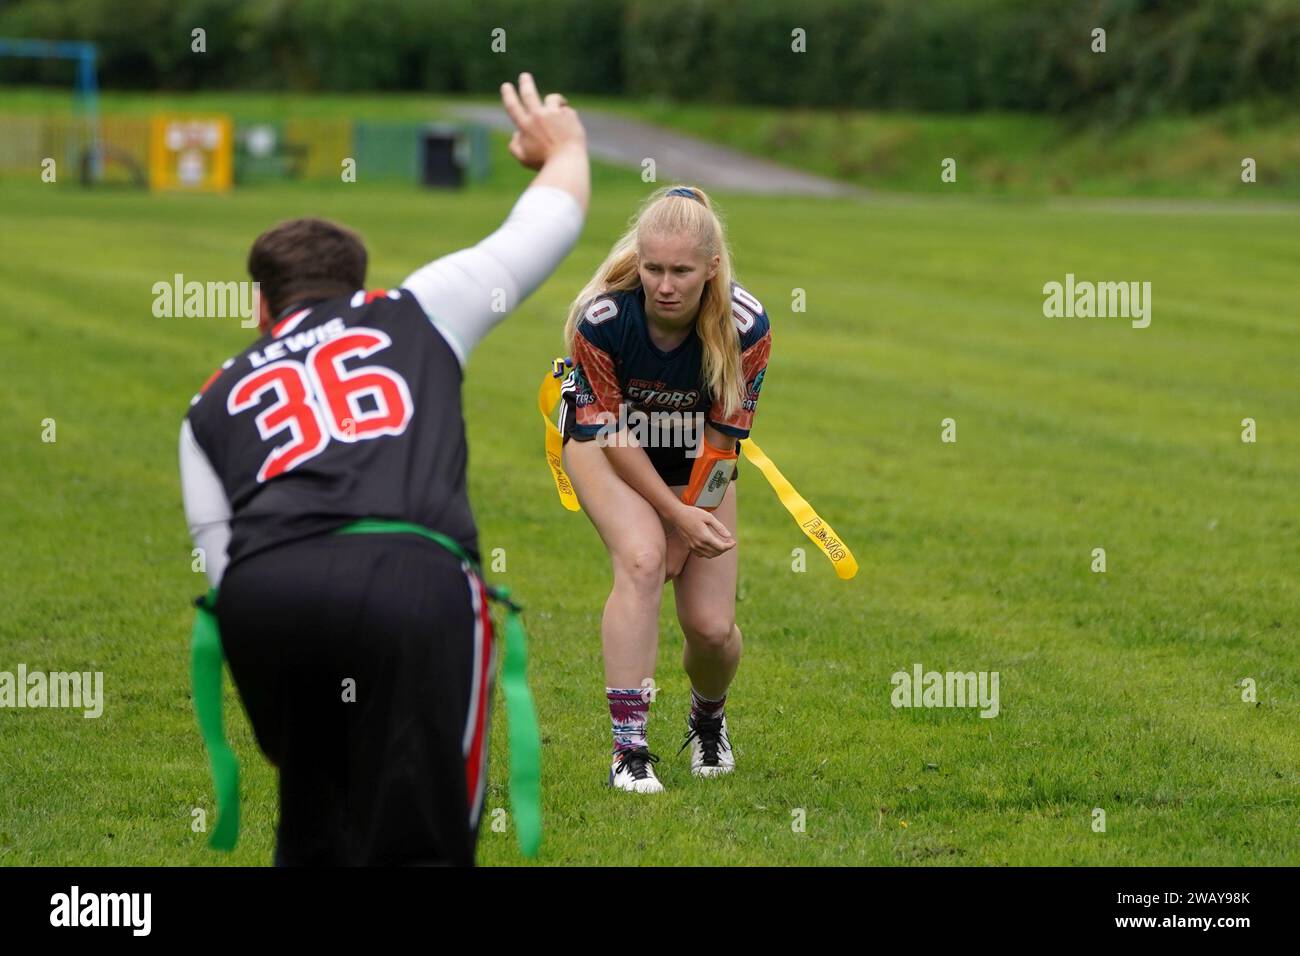 Welsh Bowl Group game - pitch One - Gators contro Sealand Foto Stock